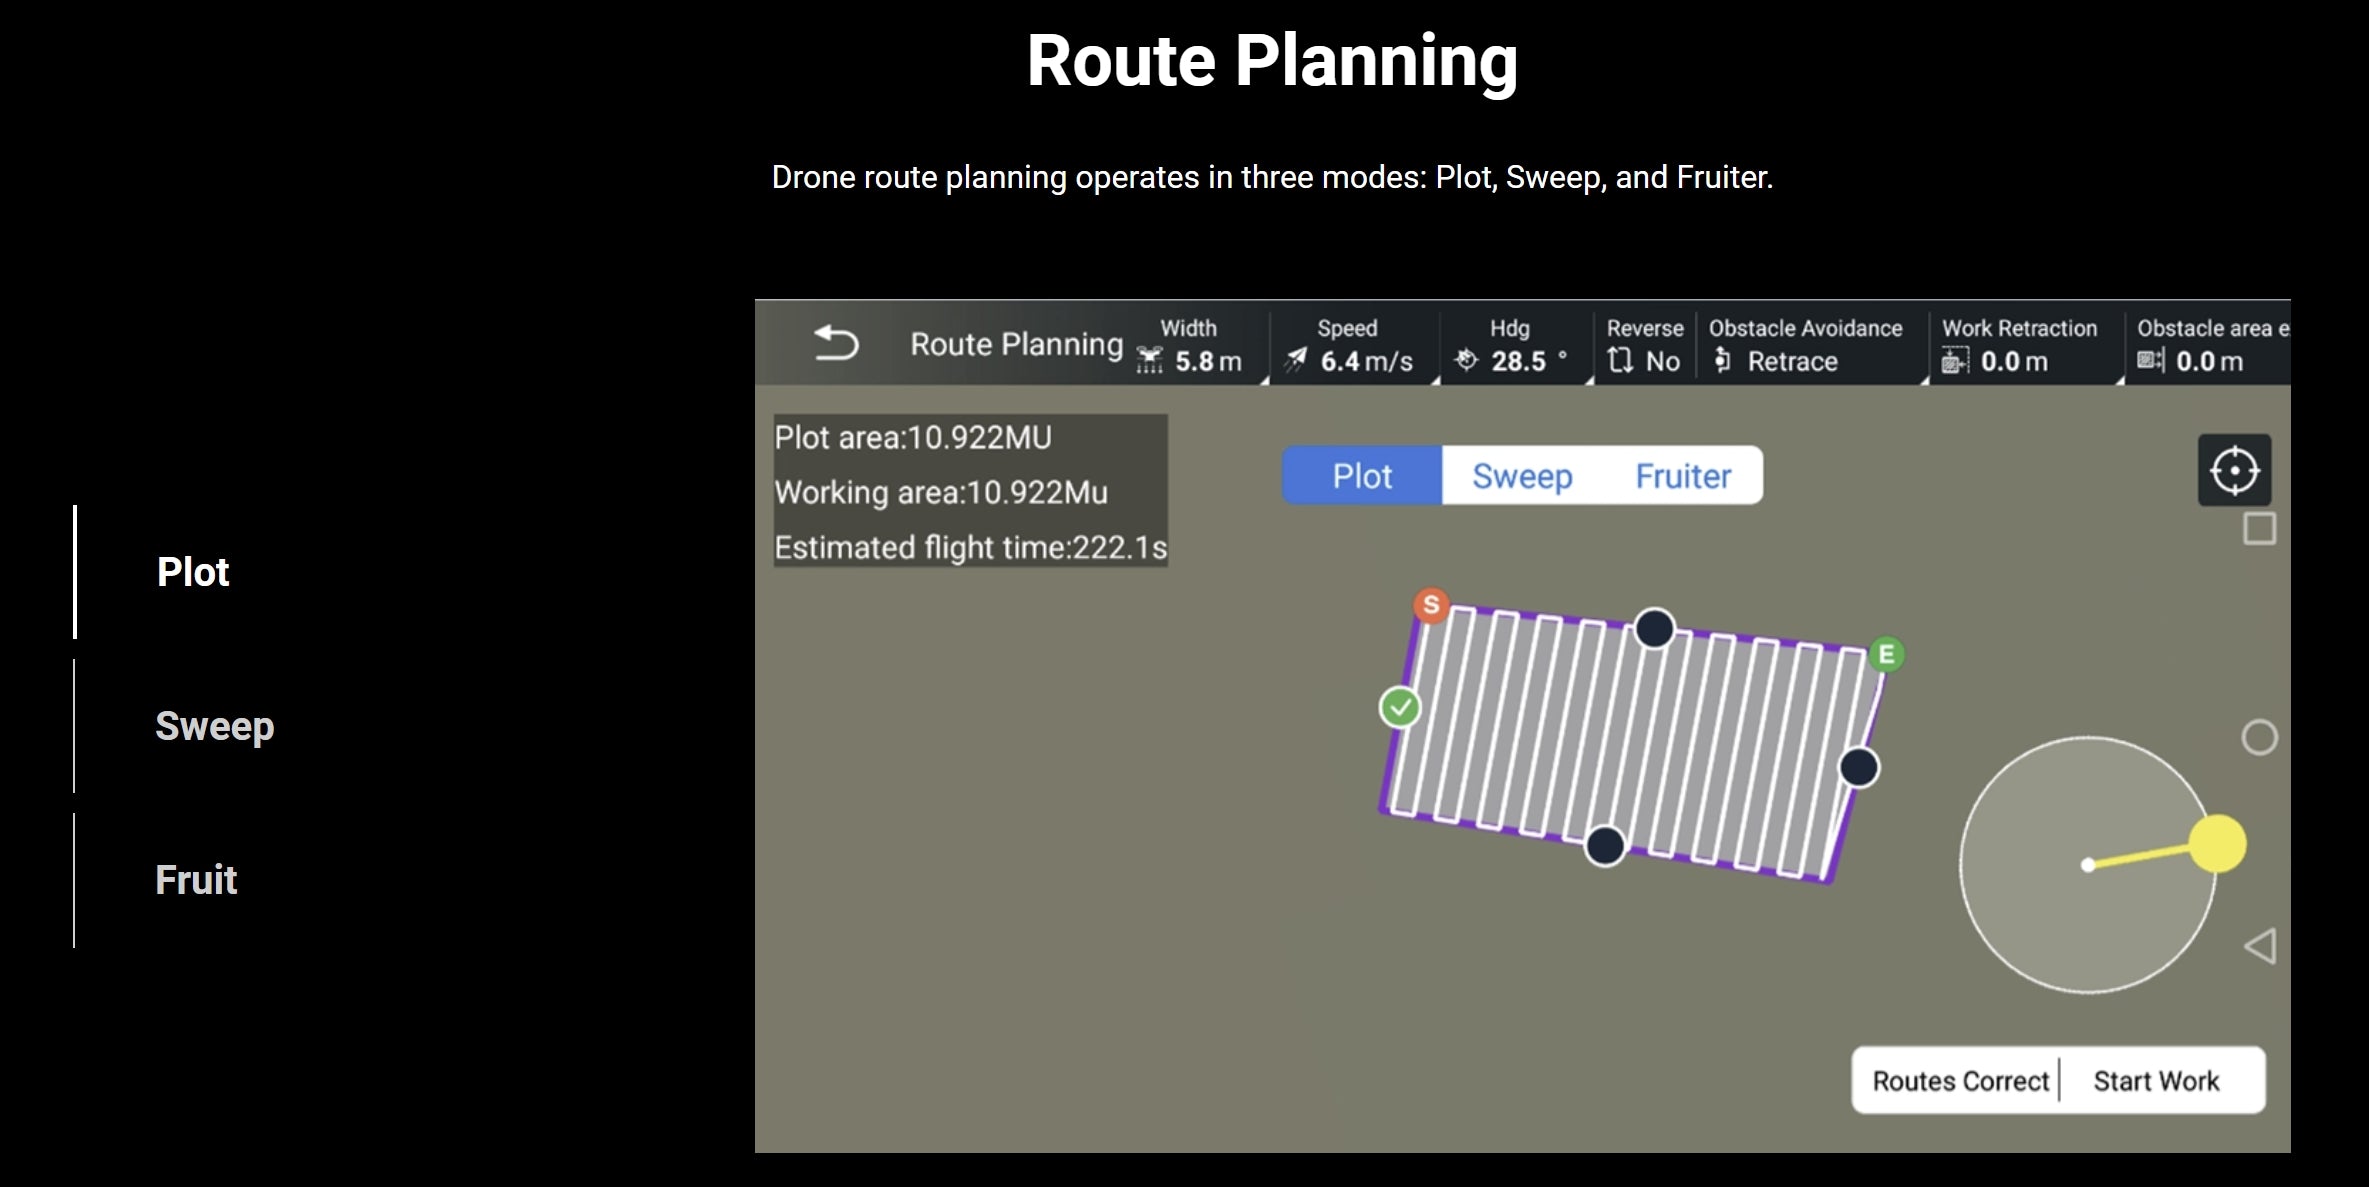 H160 Agricultural Drone, Drone route planning operates in three modes: Plot; Sweep, and Fruit